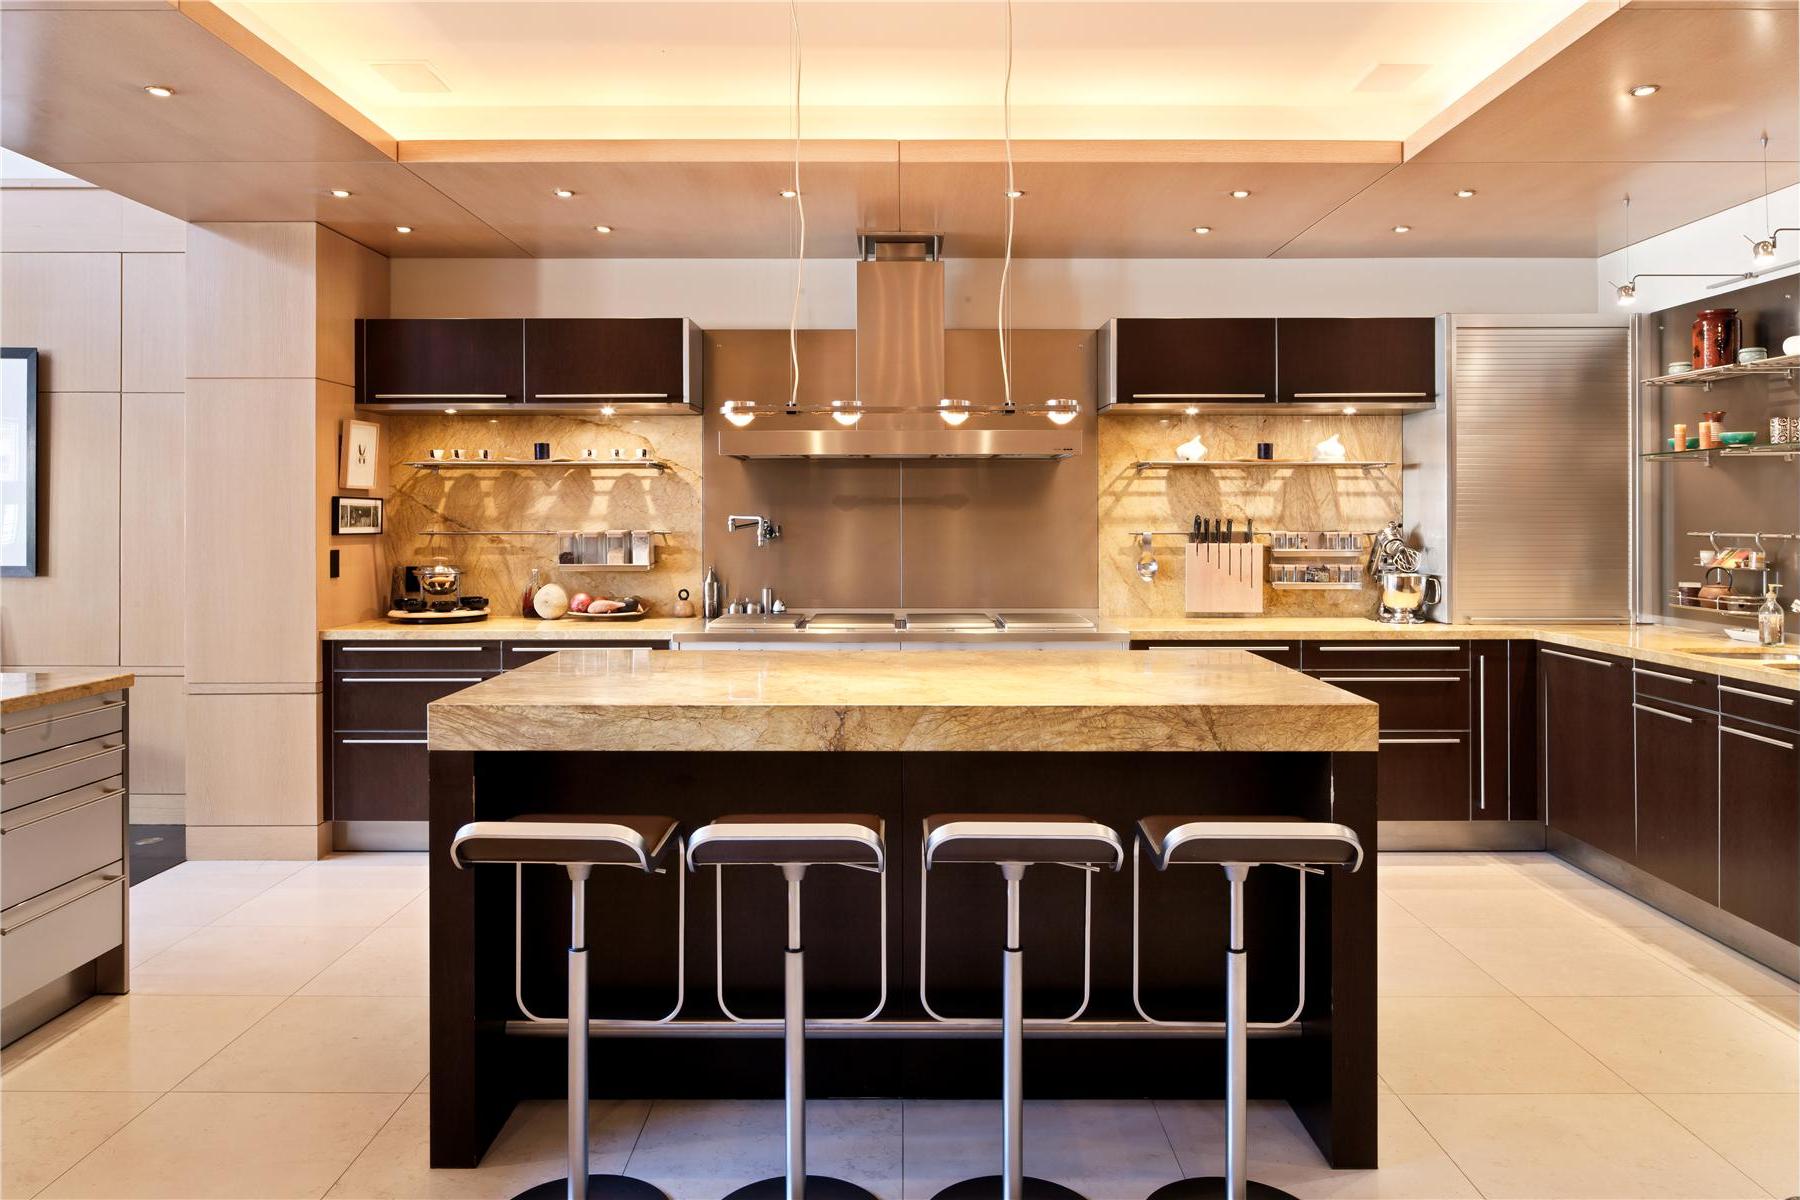 show me pictures of kitchen design